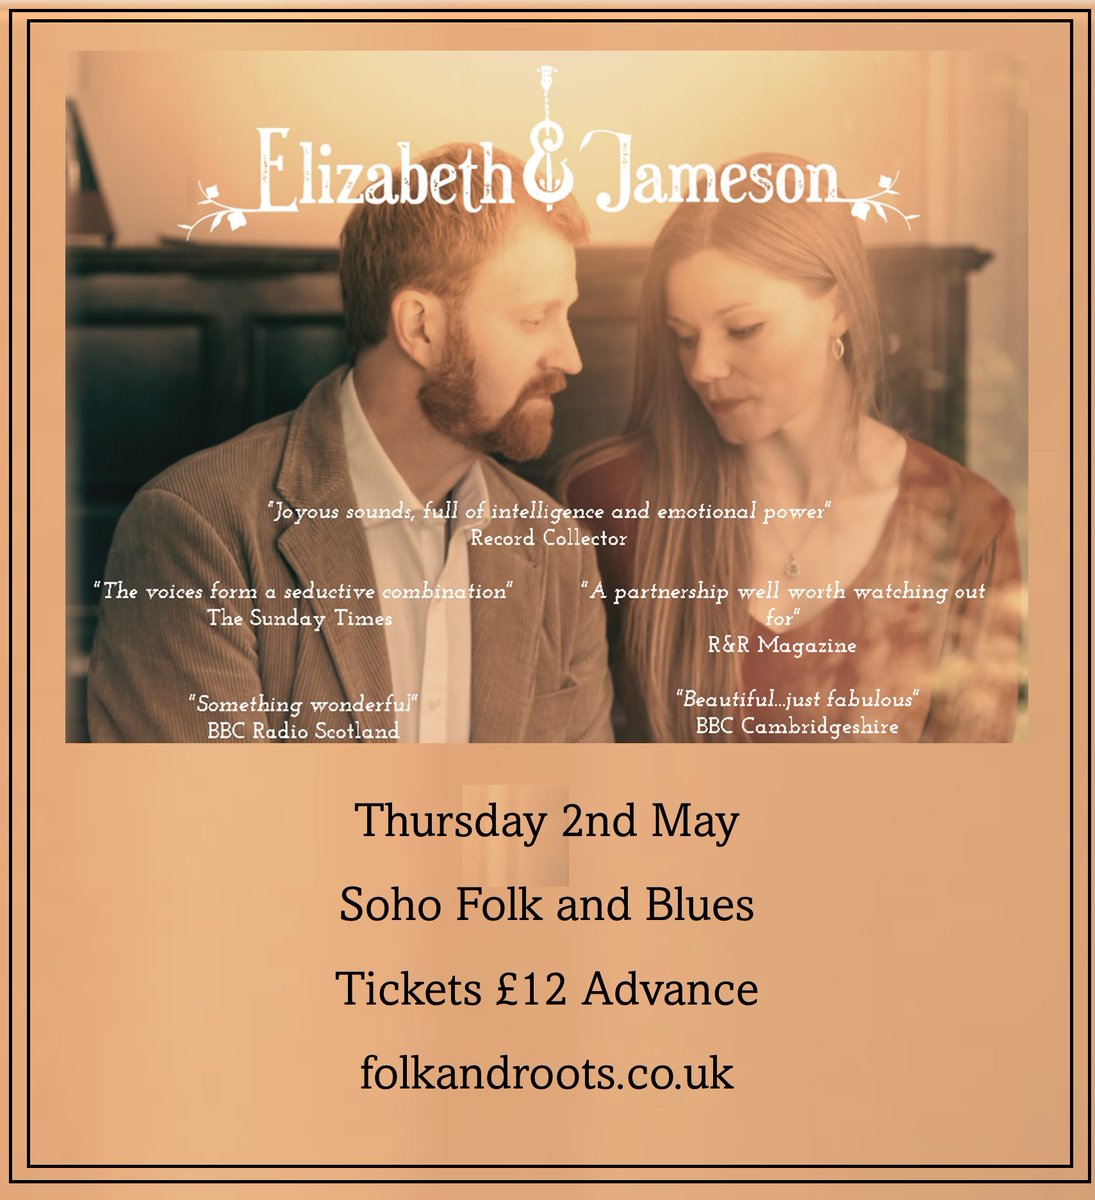 On Thursday 2nd May Elizabeth & Jameson perform Soho Folk and Blues #London - Adv tickets £12 via folkandroots.co.uk Hannah Elizabeth and Griff Jameson have joined forces to create an acoustic folk-roots sound which encompasses both their individual musical backgrounds